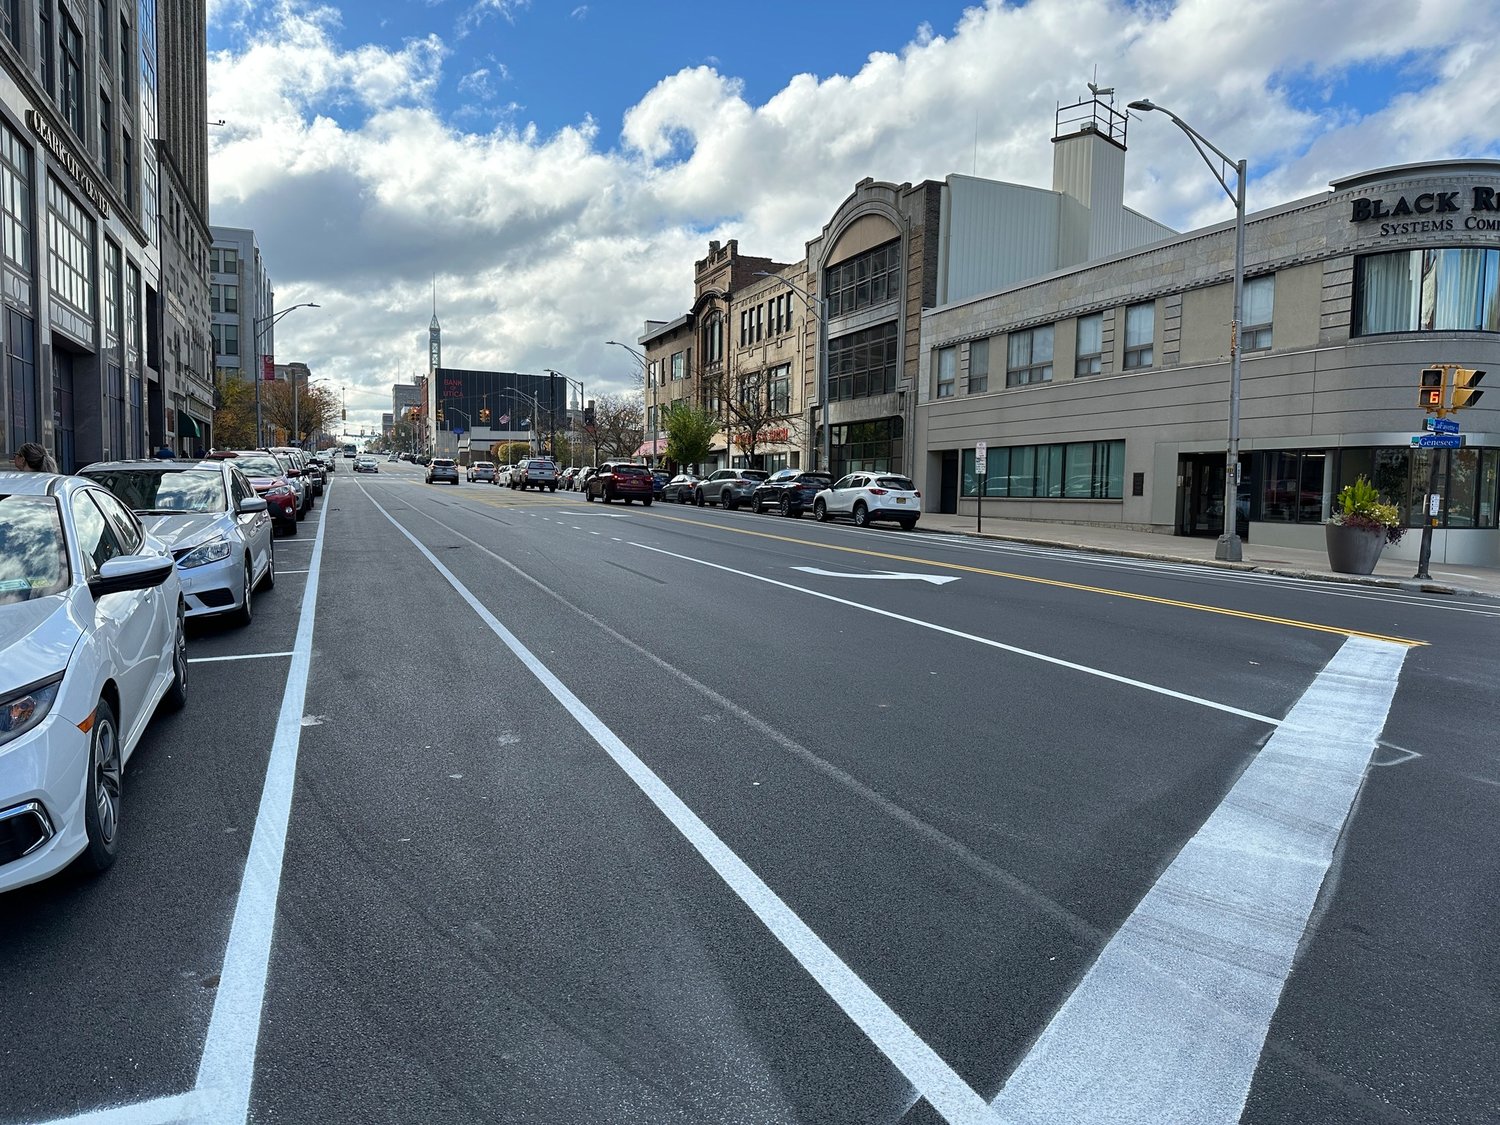 City officials have extended the 90-day trial for Genesee Street, where the complete streets traffic pattern will remain for another three months. During this time, C&S Engineering, an independent engineering firm, will analyze the traffic pattern and make recommendations based on their analysis.